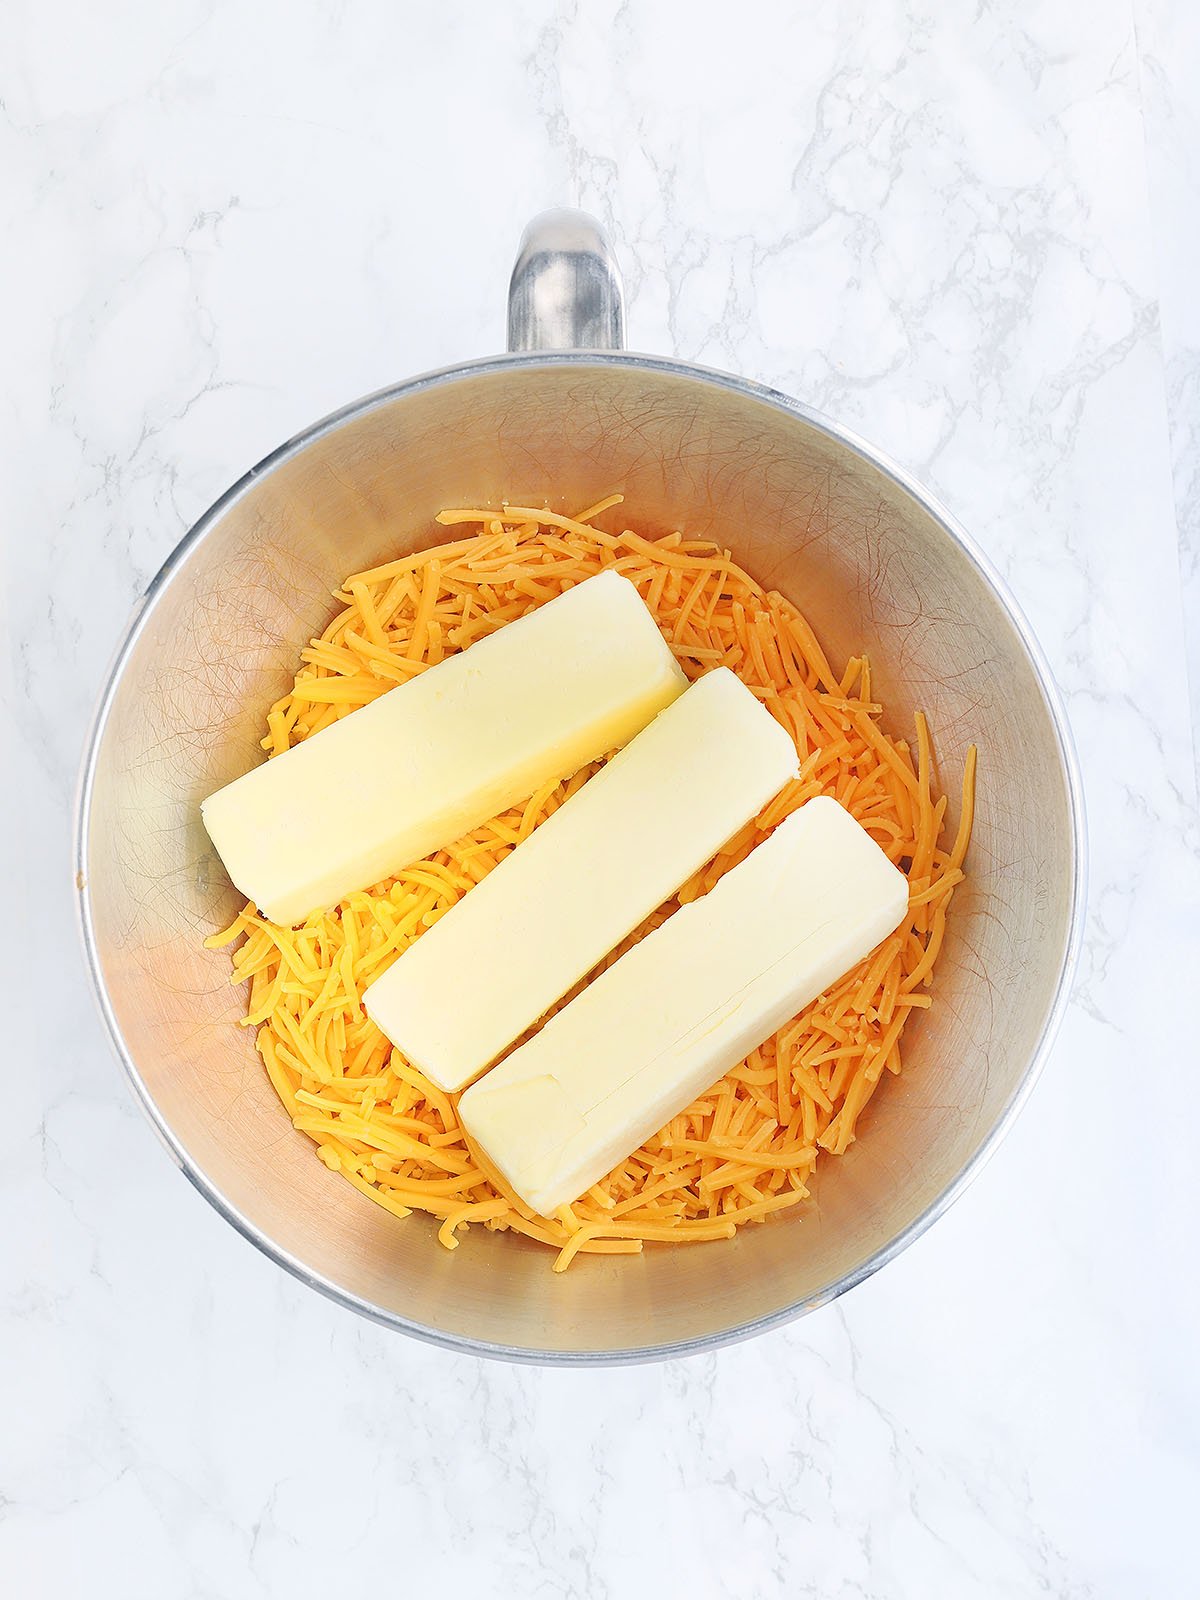 shredded cheddar cheese and three stick of butter in a metal mixing bowl